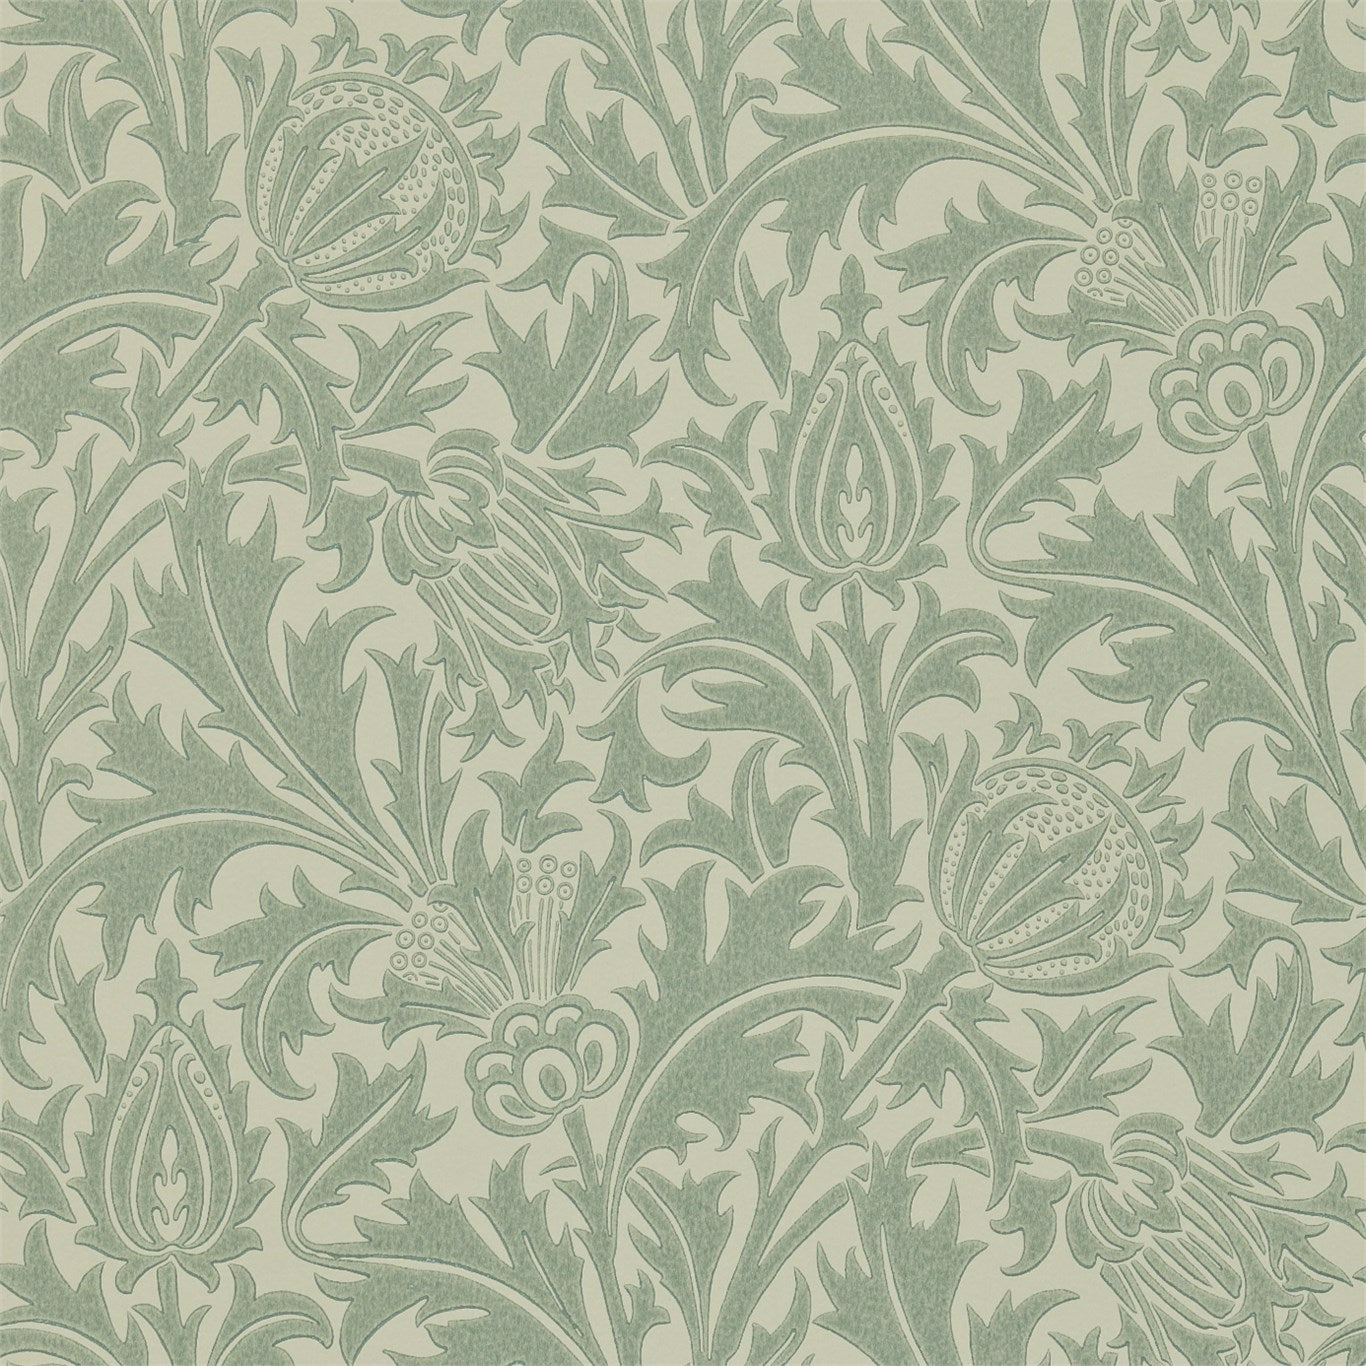 Thistle Wallpaper by Morris & Co